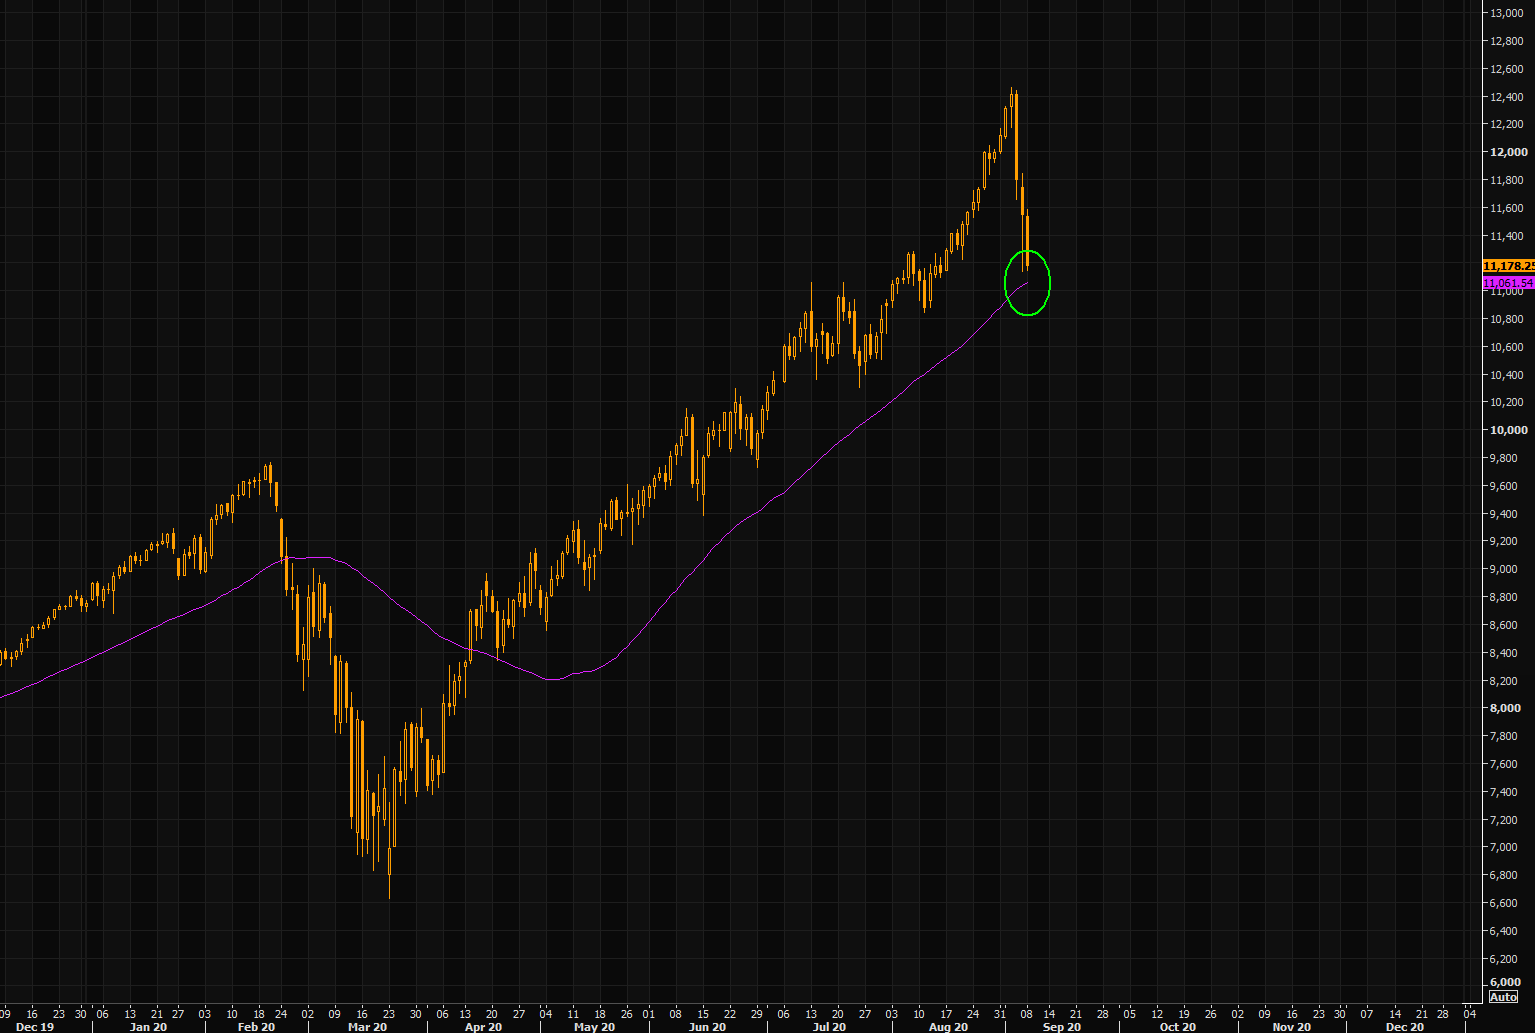 NASDAQ - 50 day "horror" show for many here